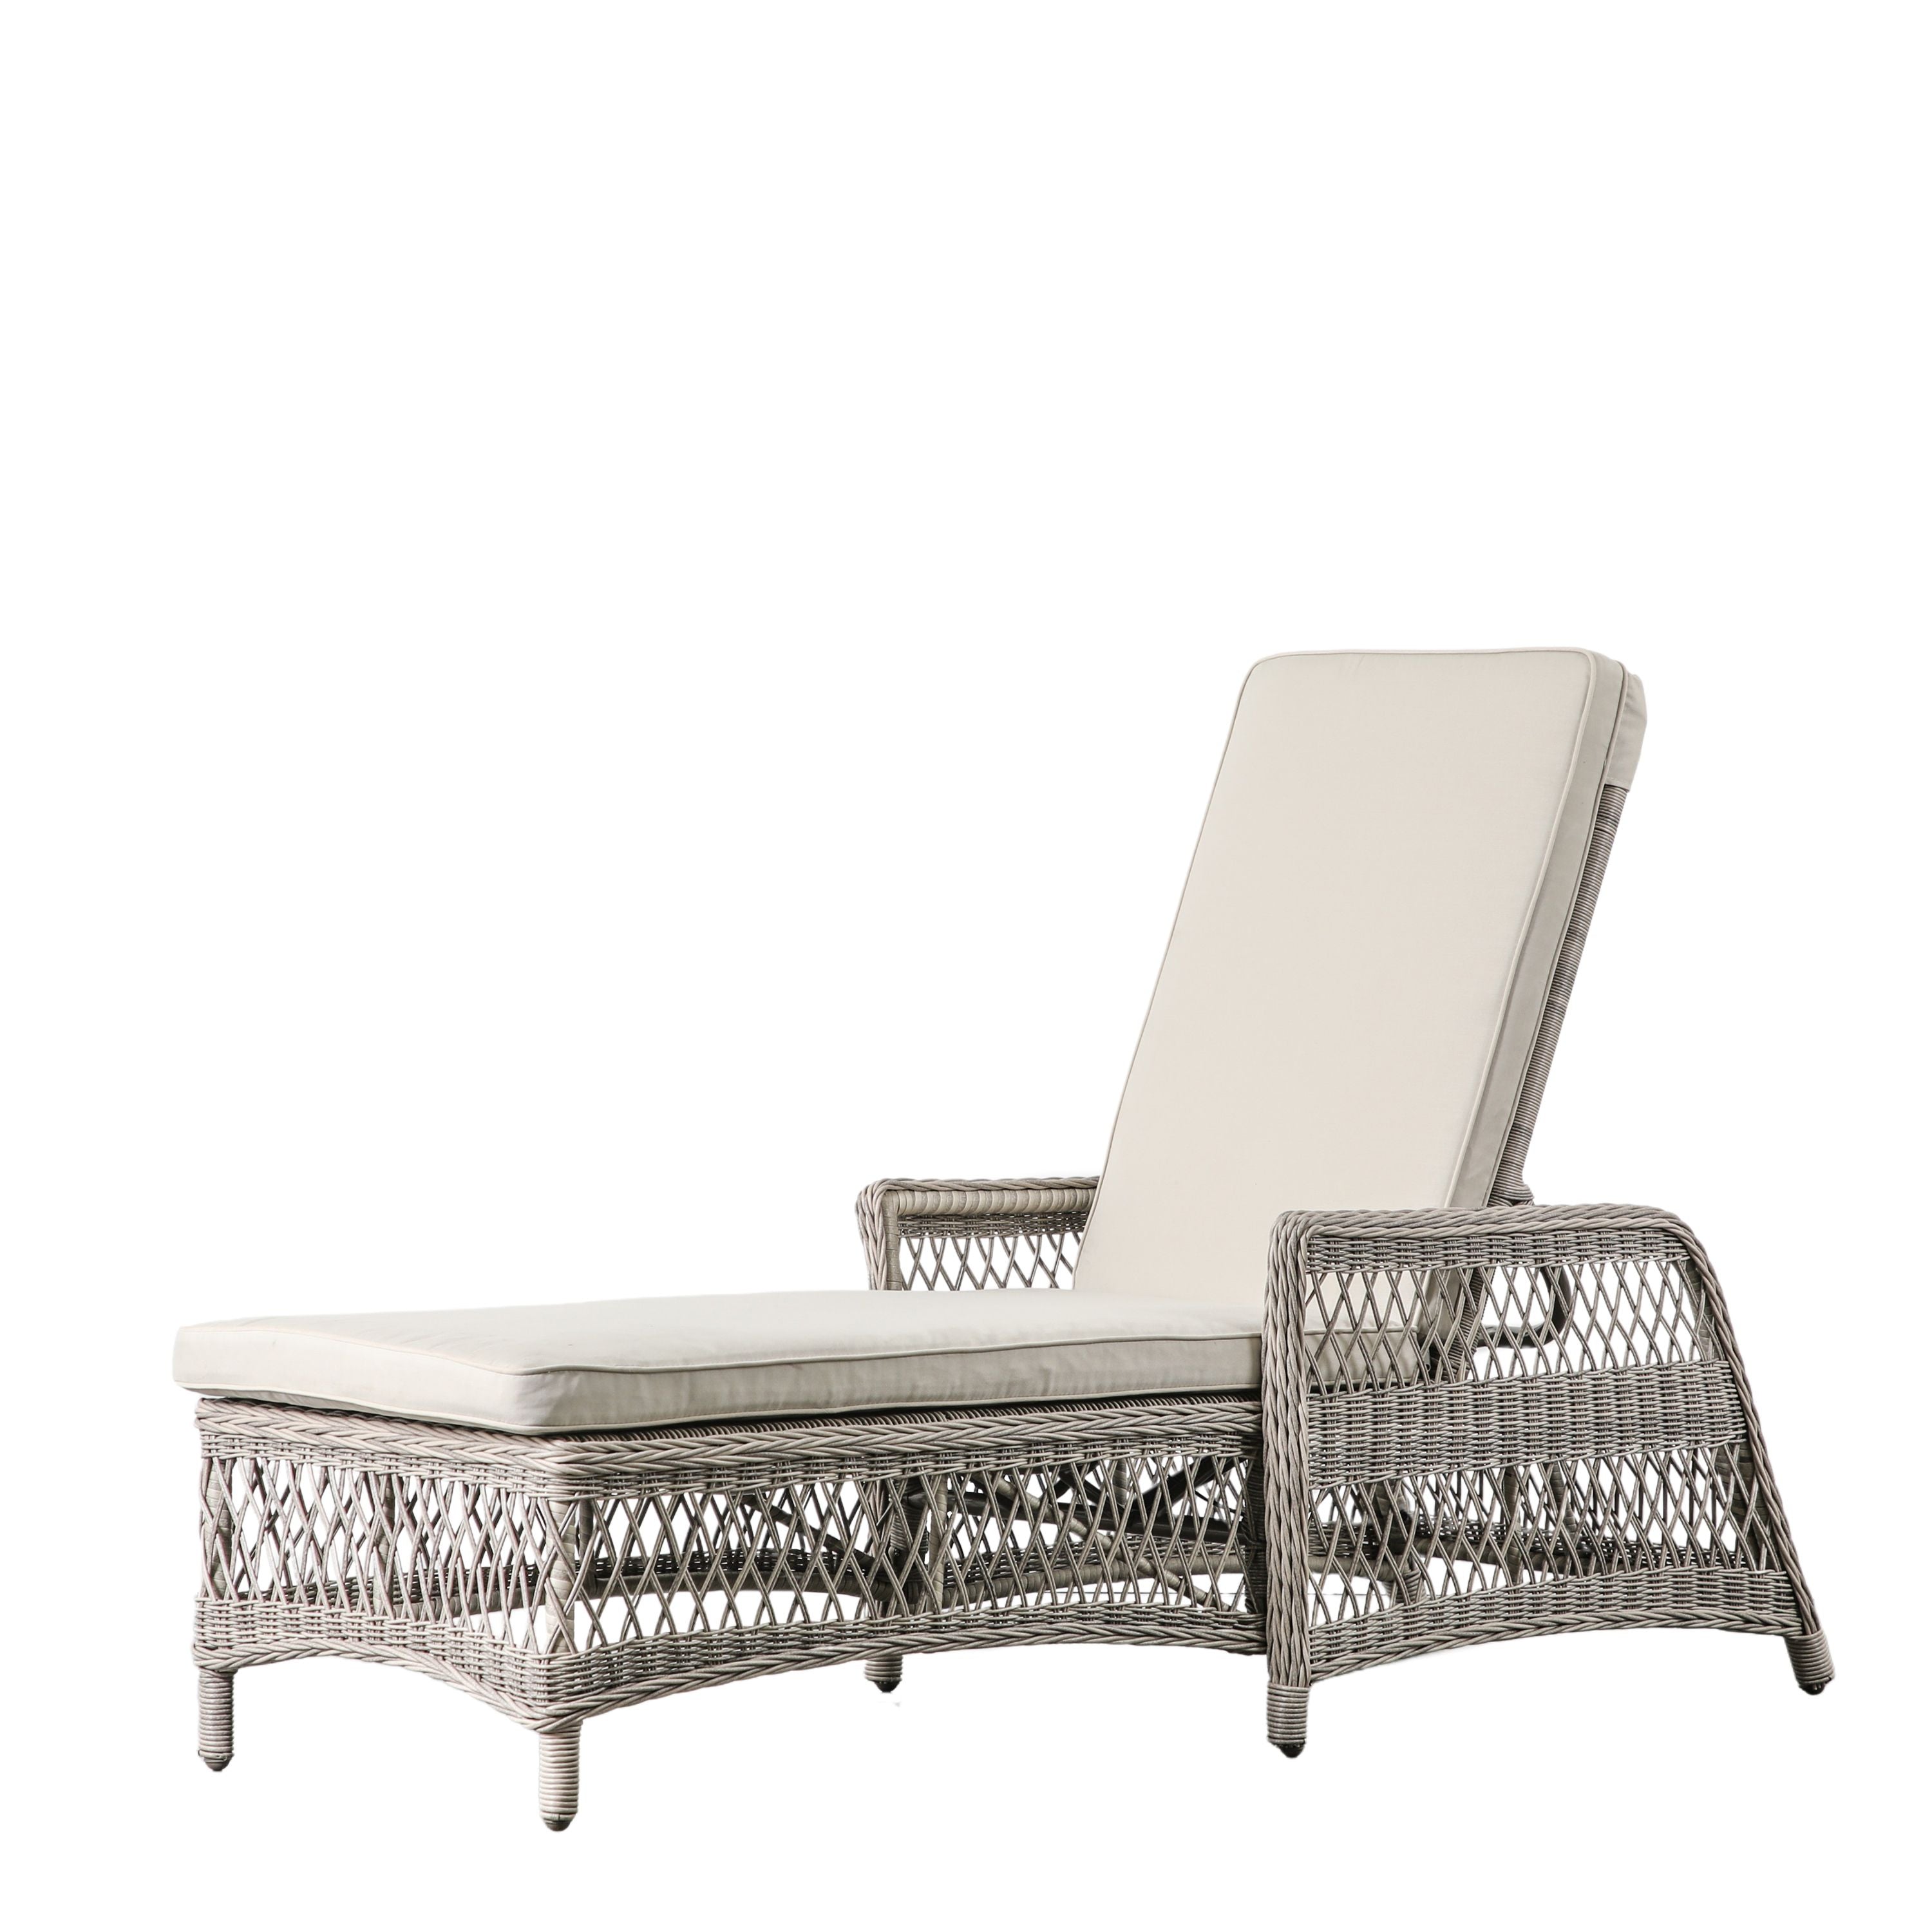 Mizza Country Lounger Stone - Vookoo Lifestyle